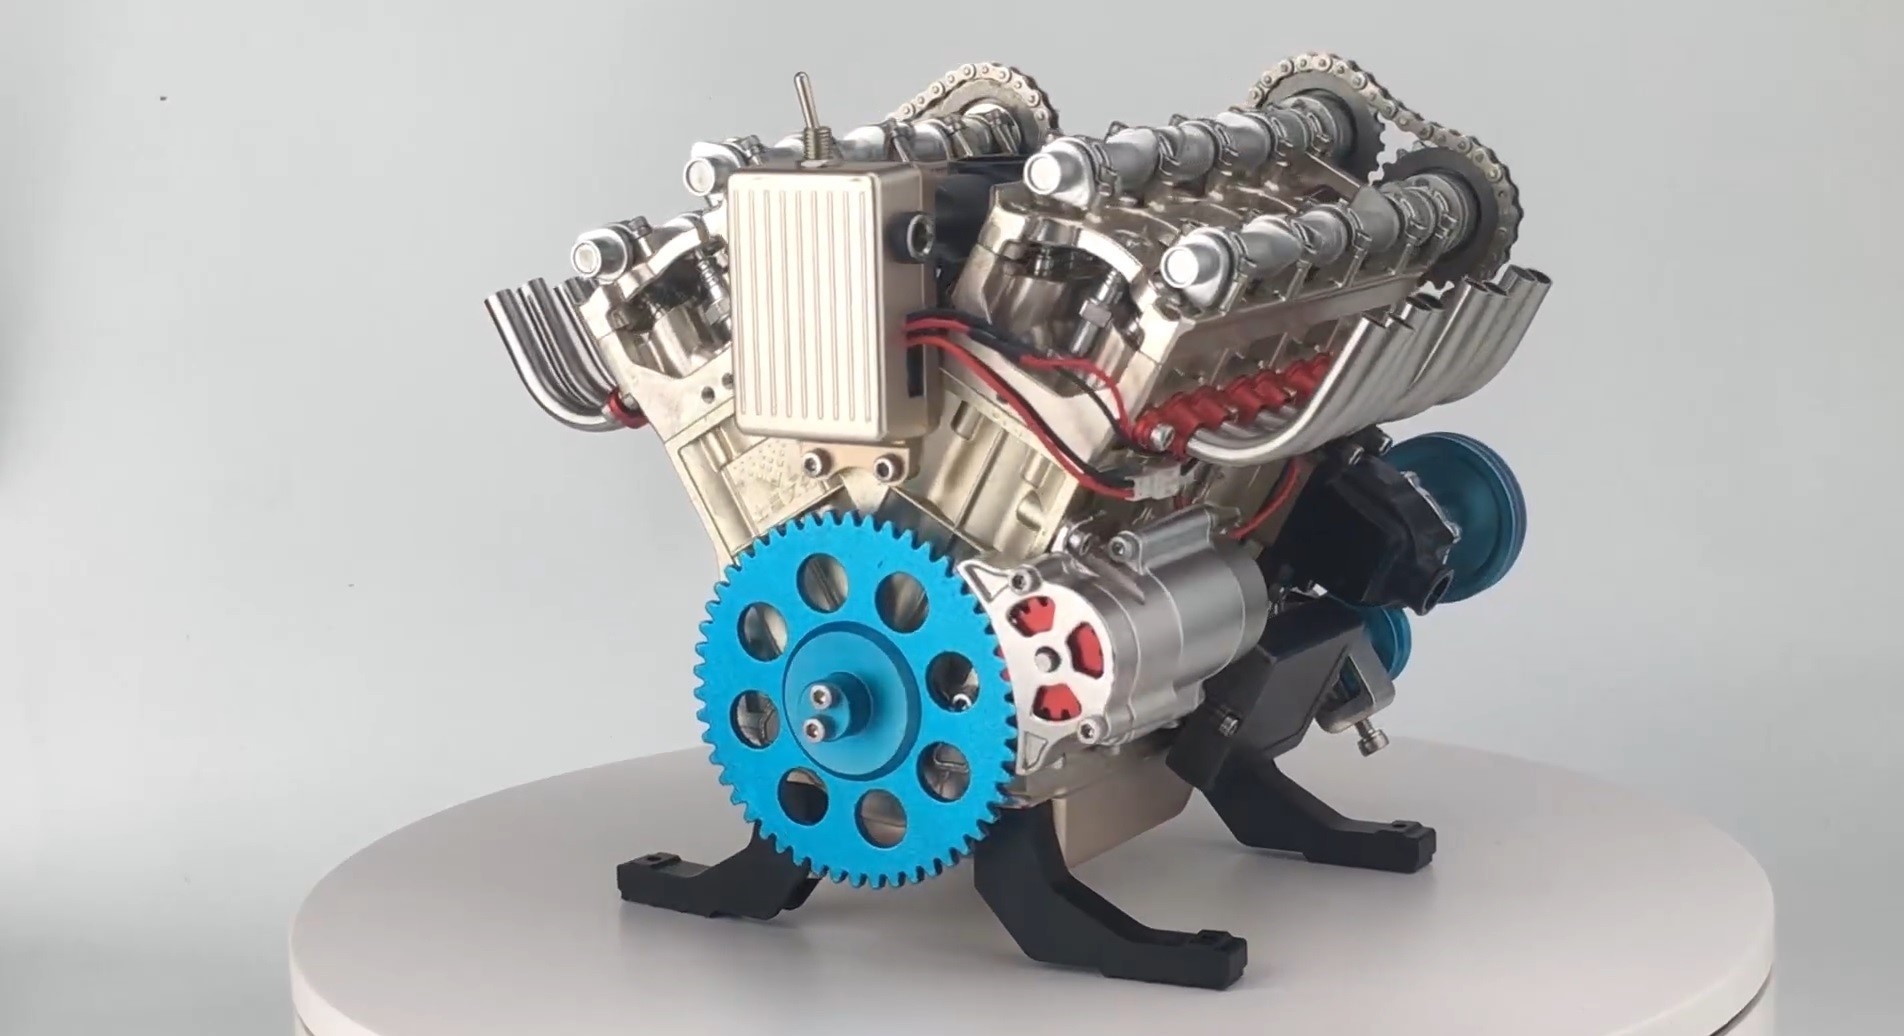 How To Build A Mini V8? - Build Your Own Engine Model